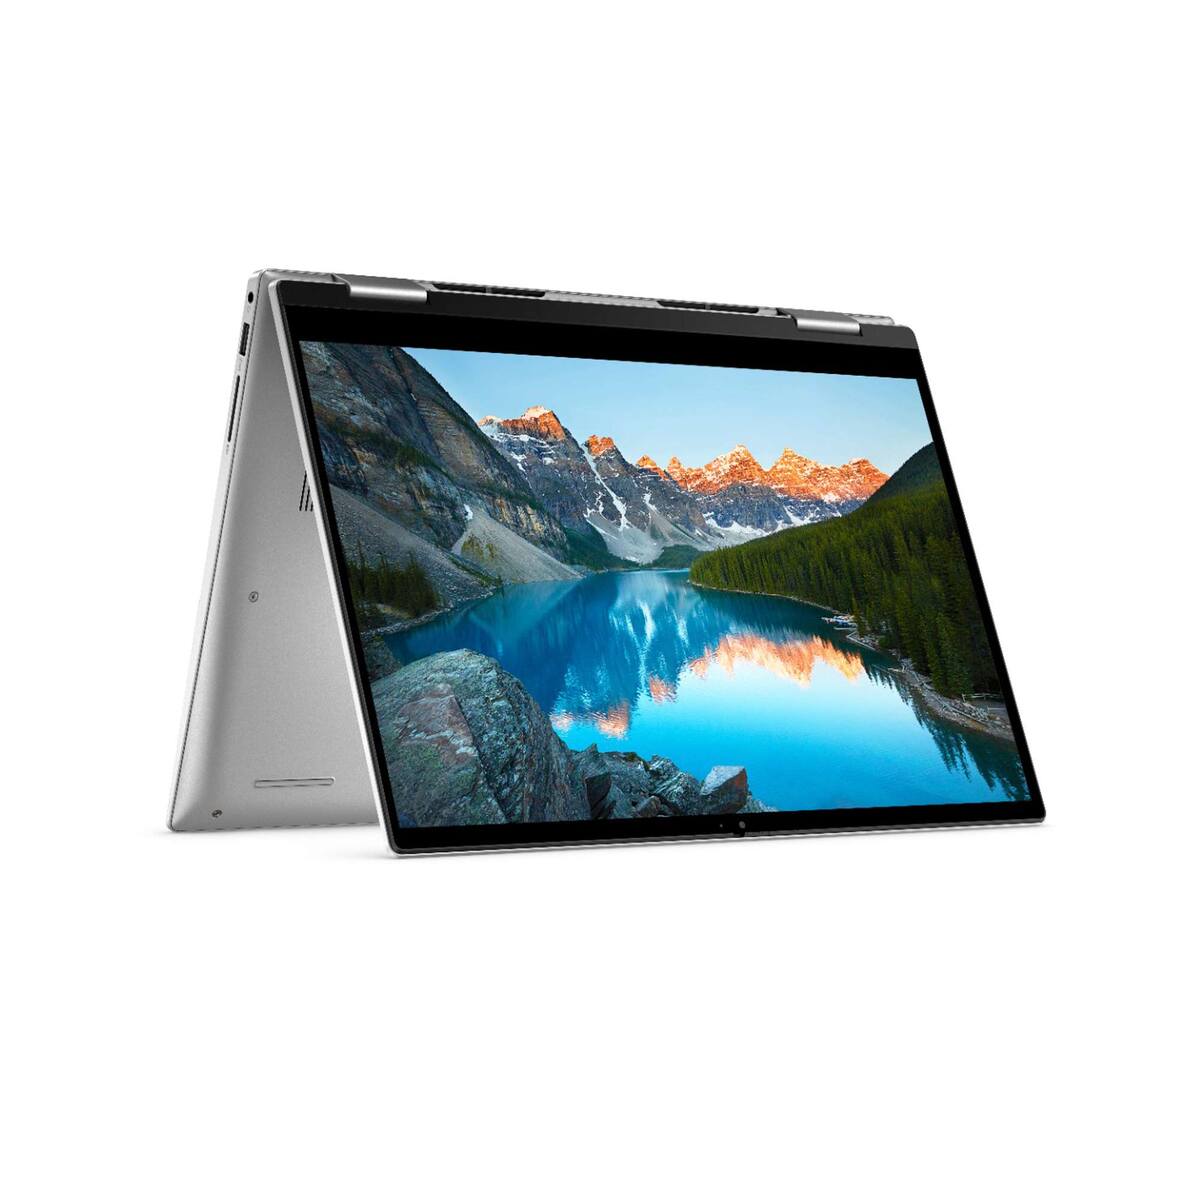 Dell Inspiron 14 2-in-1 Convertible Laptop, FHD Touch, Windows 11, Intel Core i7, Intel XE Graphics, 16 GB RAM, 1 TB, Silver, 7430-INS-1006-SL